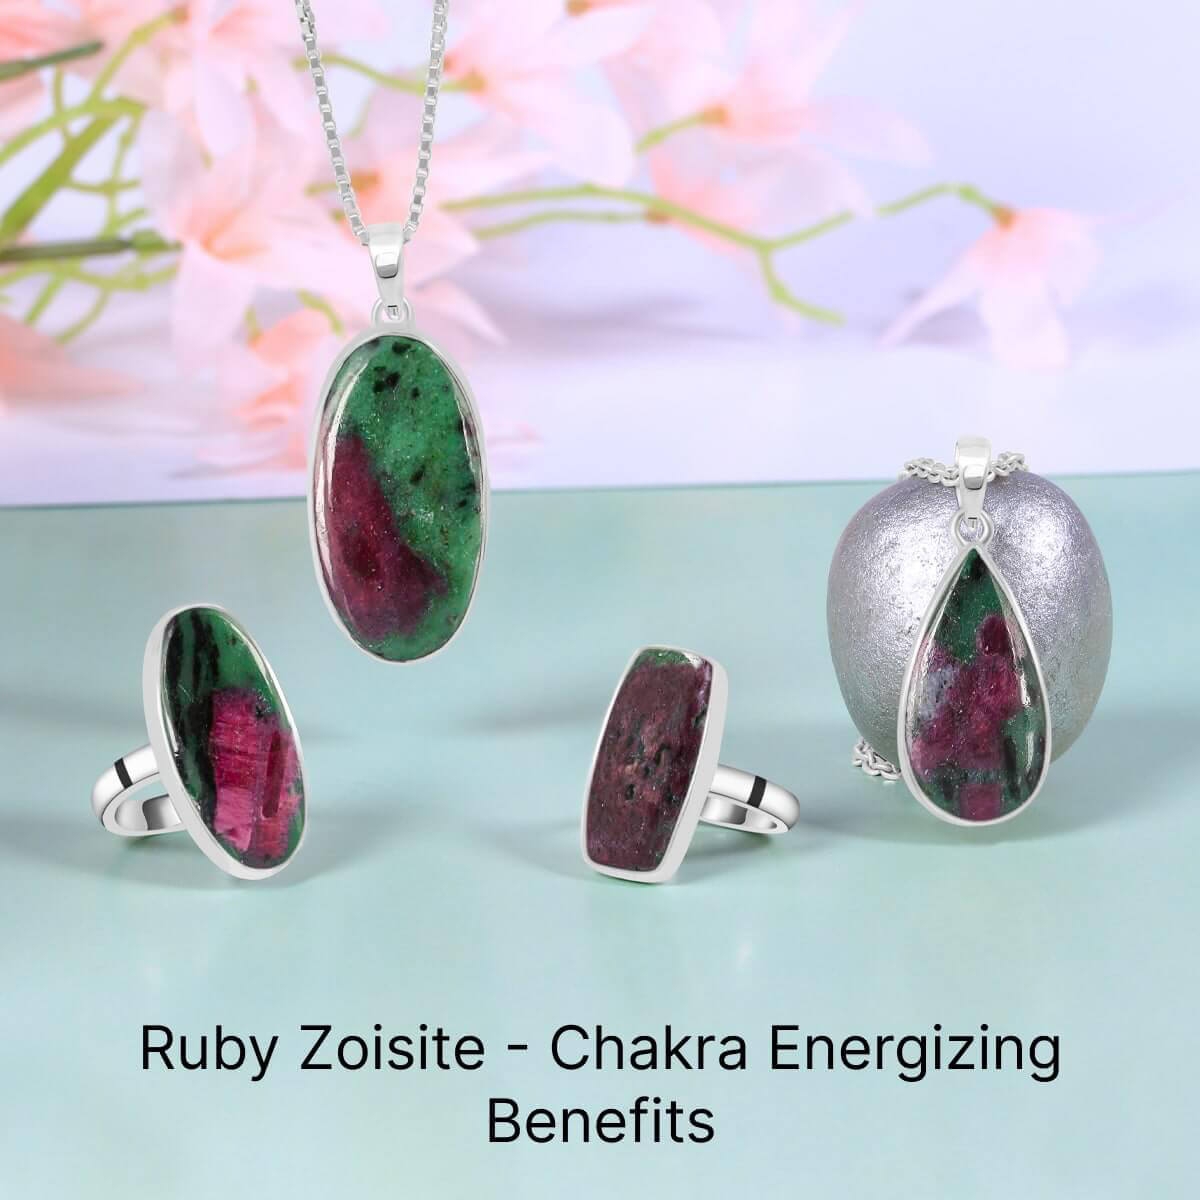 For what purposes is Ruby Zoisite beneficial in terms of chakra energy